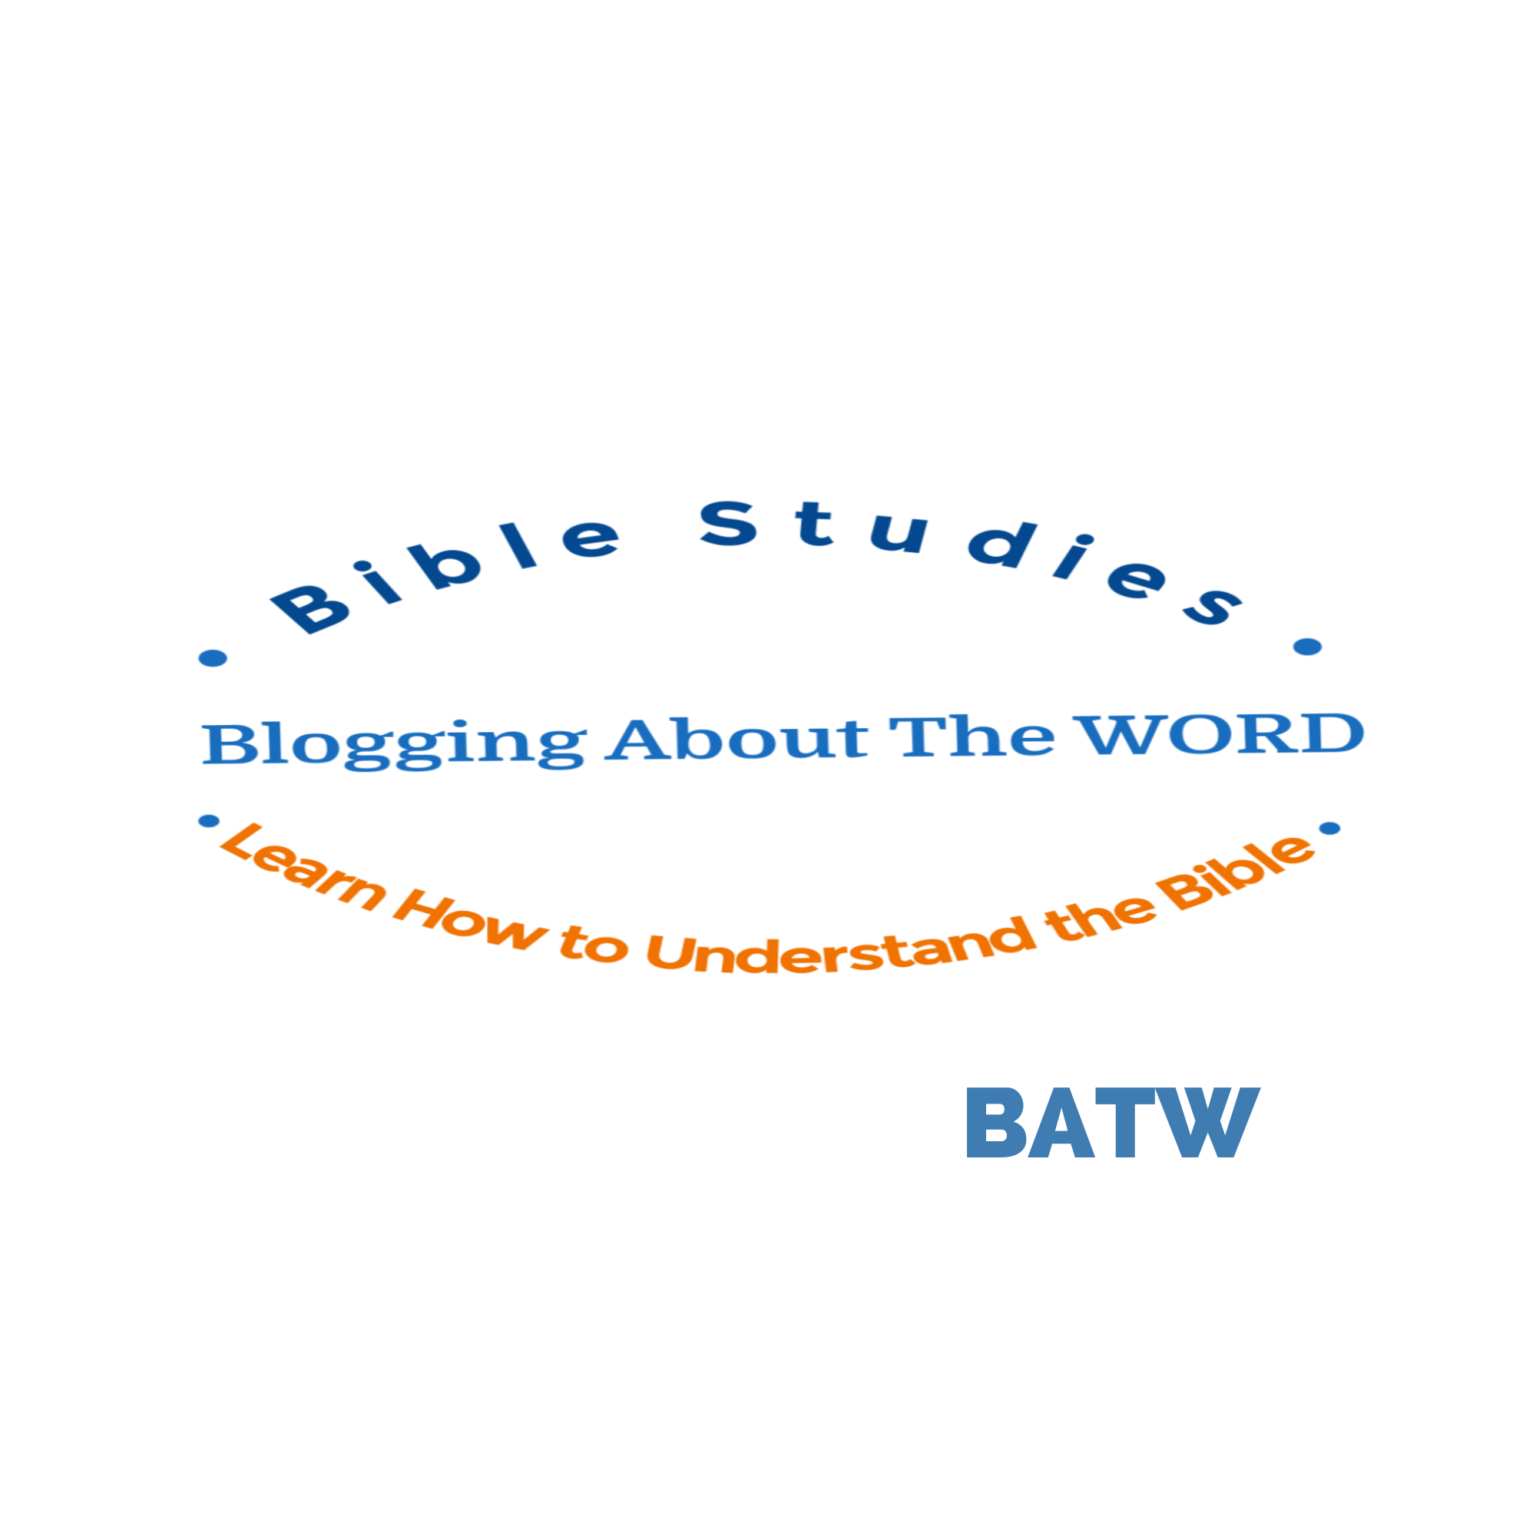 which-is-the-best-study-bible-for-pastors-blogging-about-the-word-batw